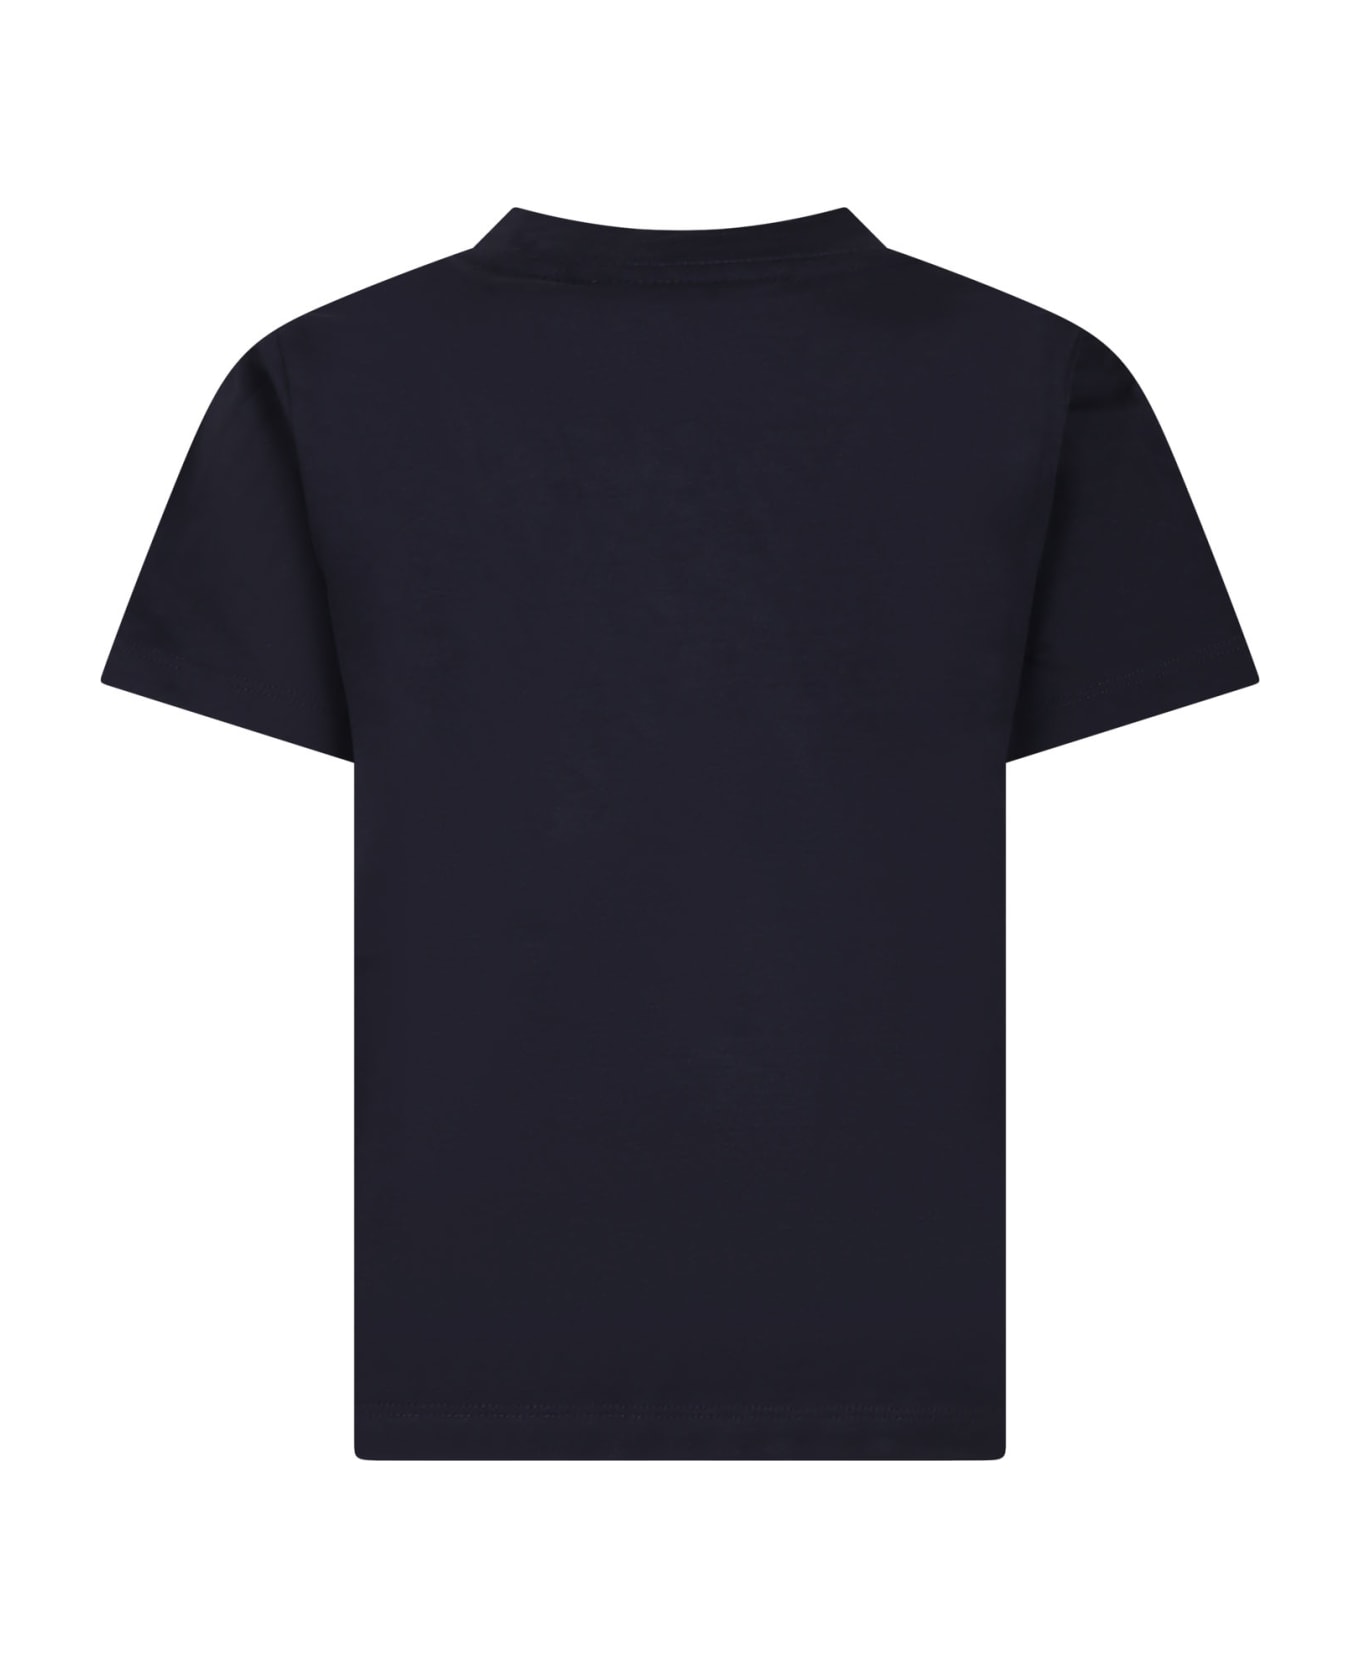 Molo Black T-shirt For Boy With Surfboard Print - Black